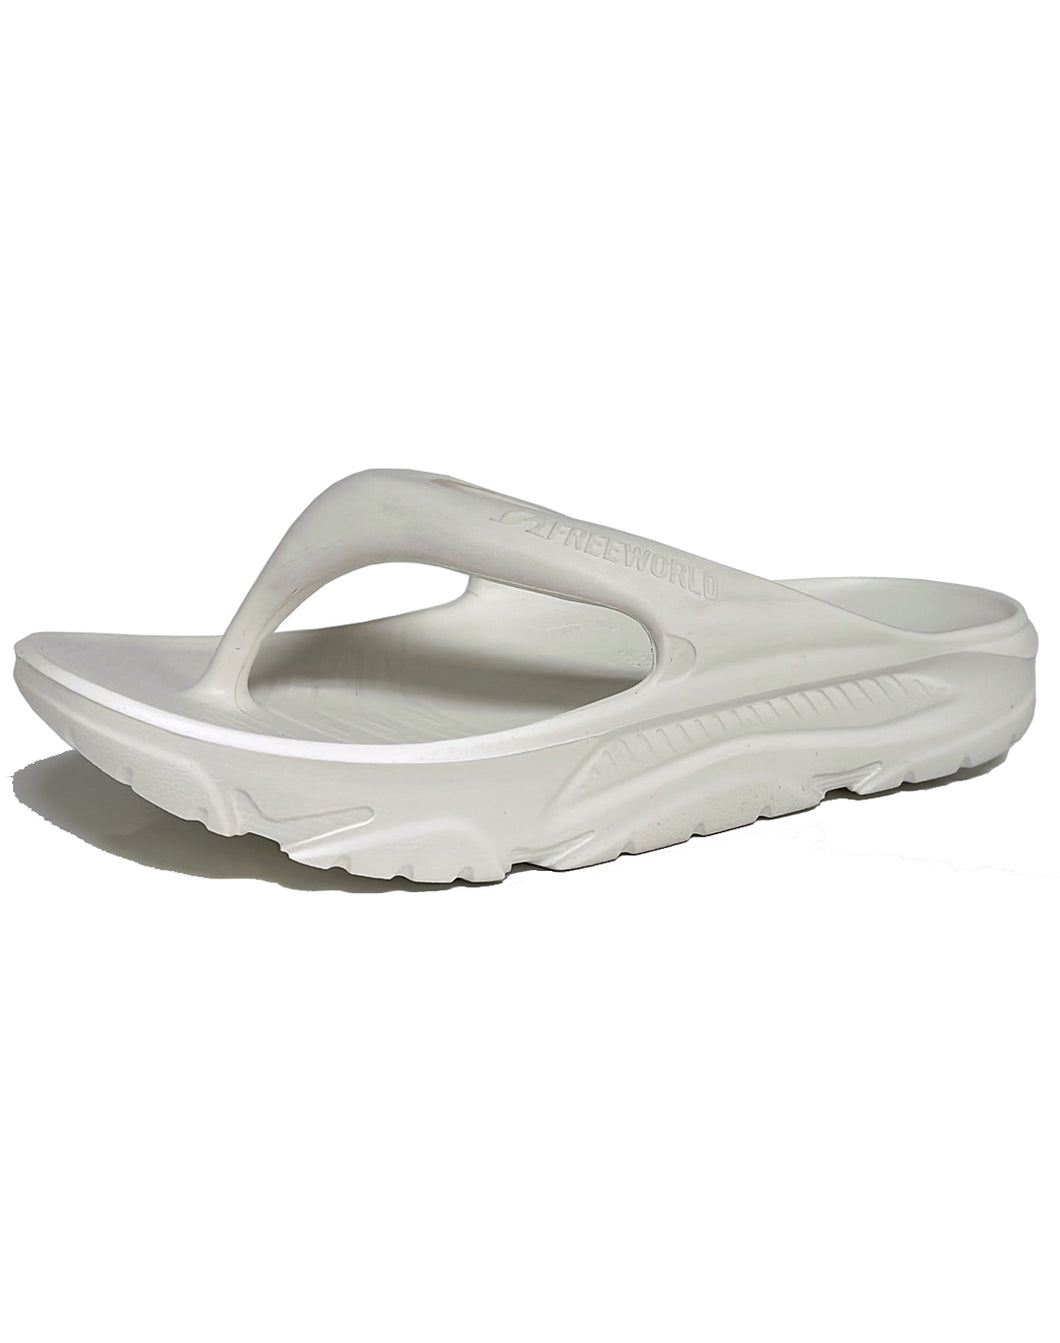 FREEWORLD FW100K RECOVERY FLIP FLOP - WHITE